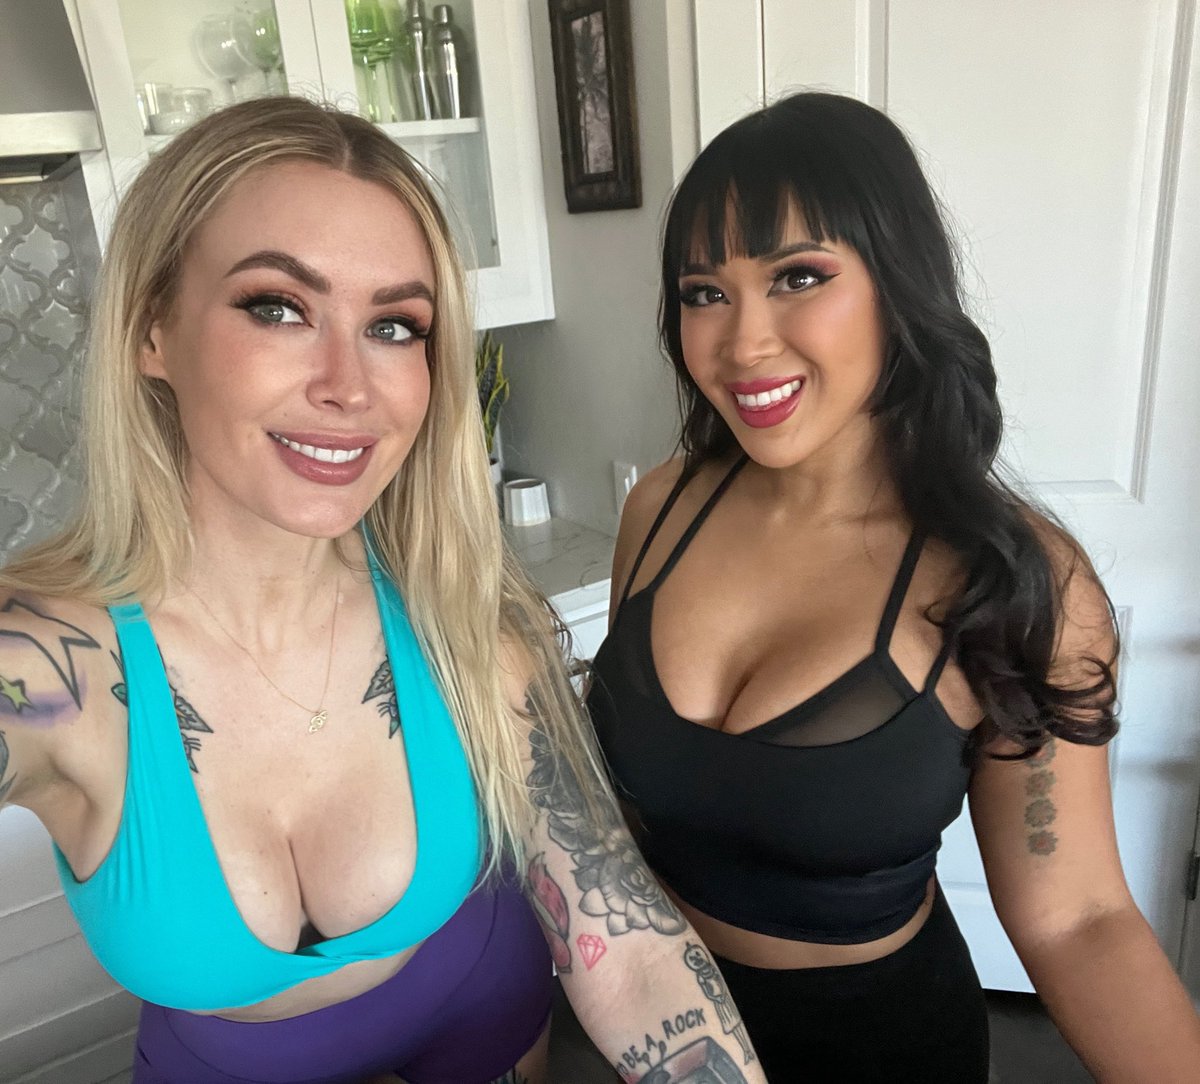 starting a new puzzle on stream today and @mishamai_hime is coming over to help me out! we will be live in a couple of hours at twitch.tv/lauralux